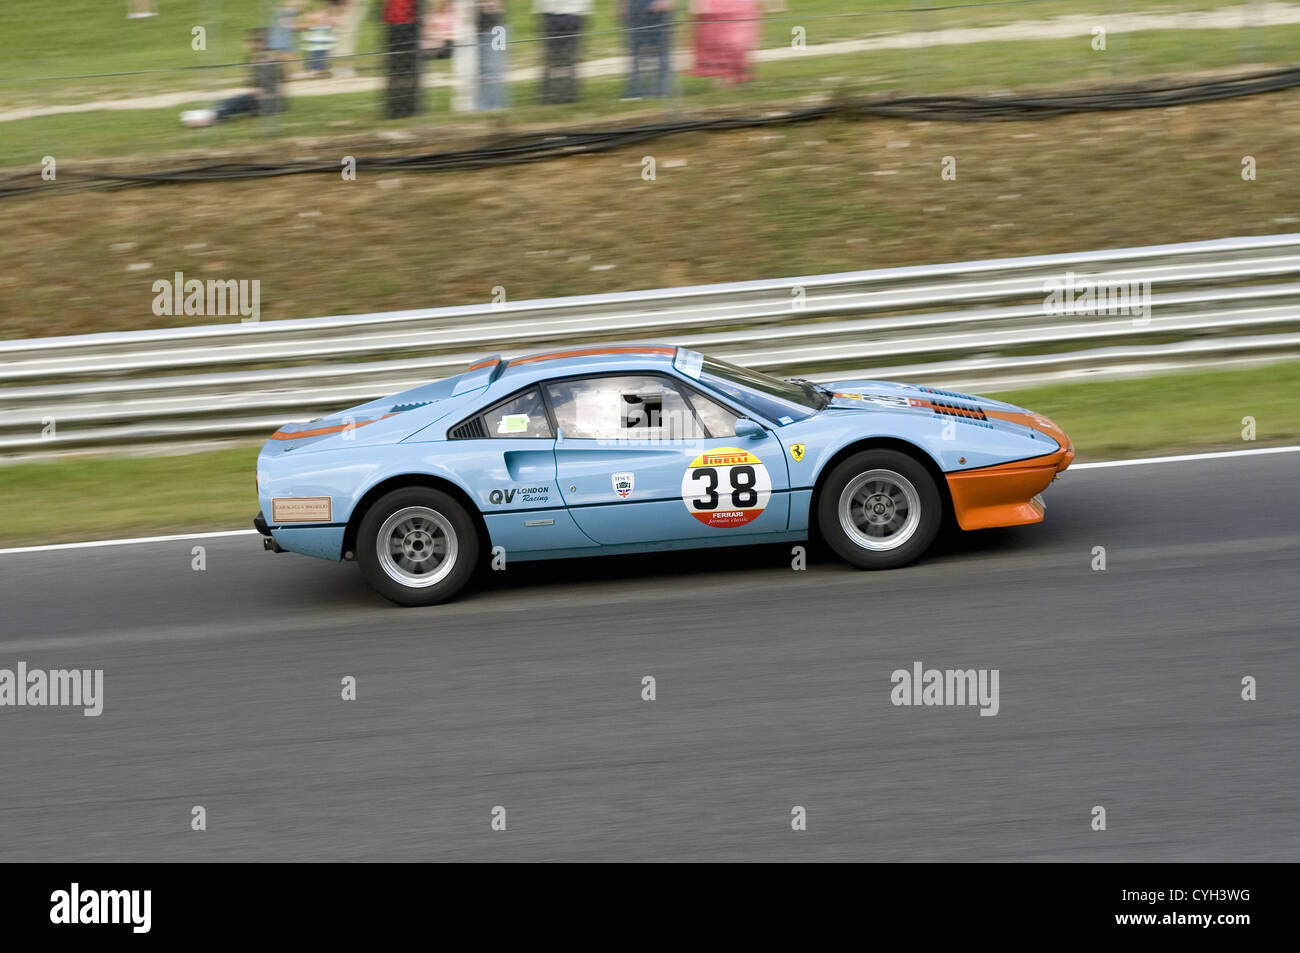 A Ferrari in blue and orange gulf colours racing at Brands Hatch circuit. Stock Photo